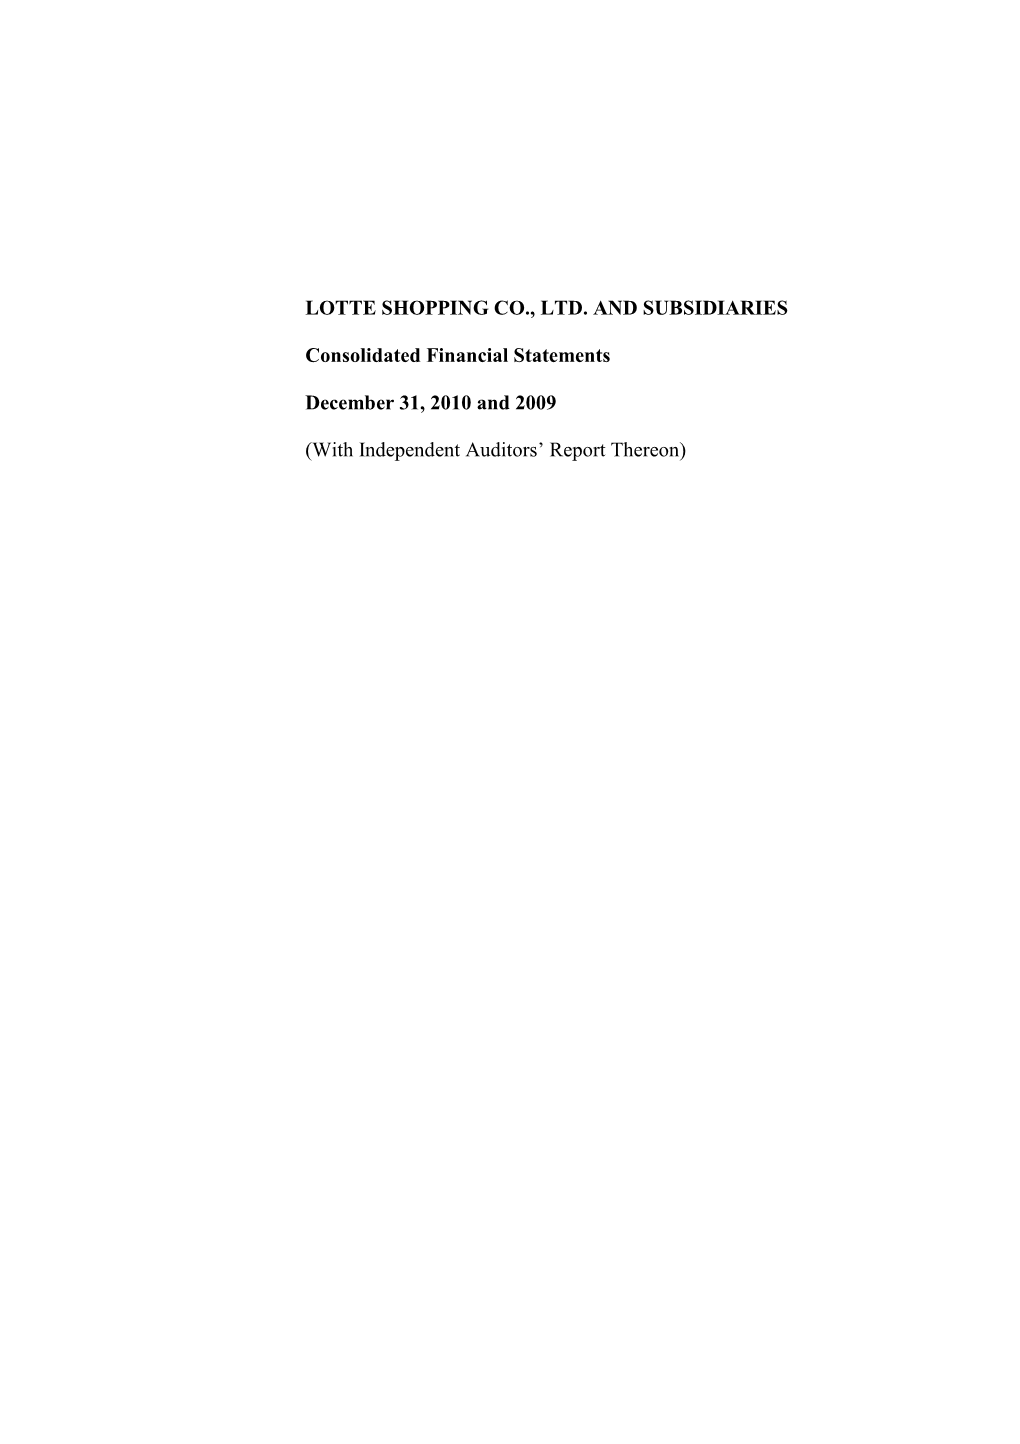 LOTTE SHOPPING CO., LTD. and SUBSIDIARIES Consolidated